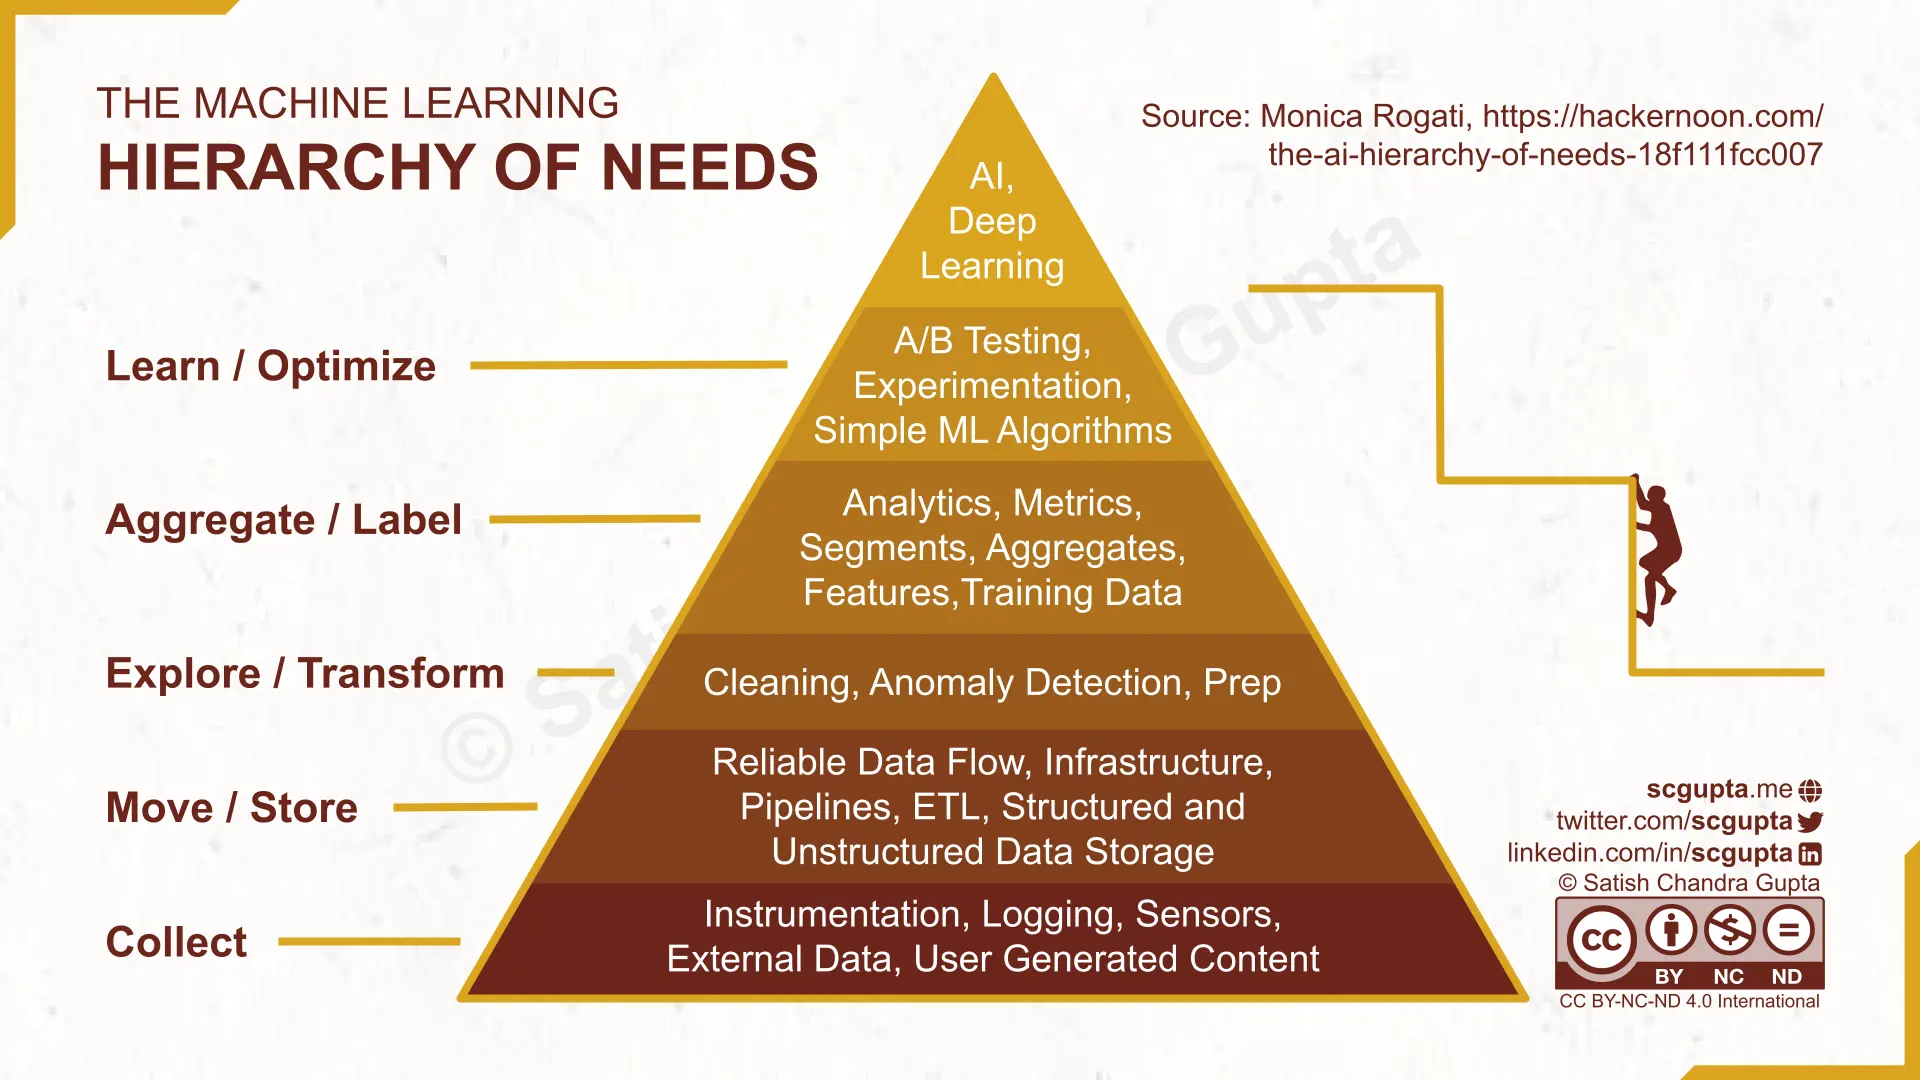 The Machine Learning Hierarchy of Needs